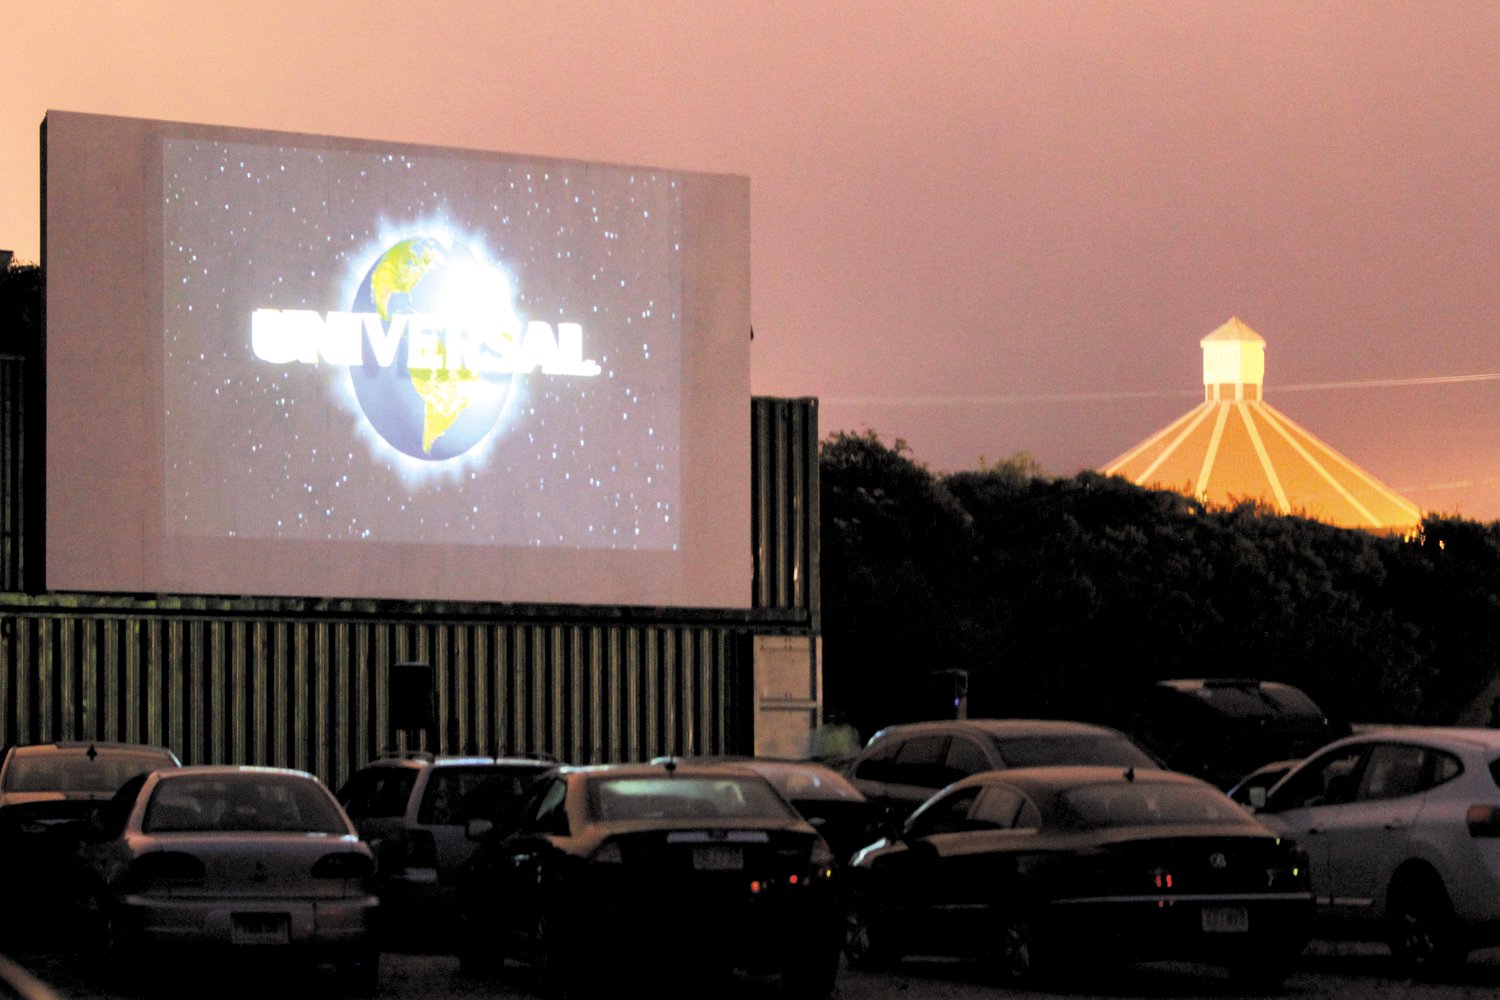 Bring the whole family to the Misquamicut Drive-in Theater Sunday night